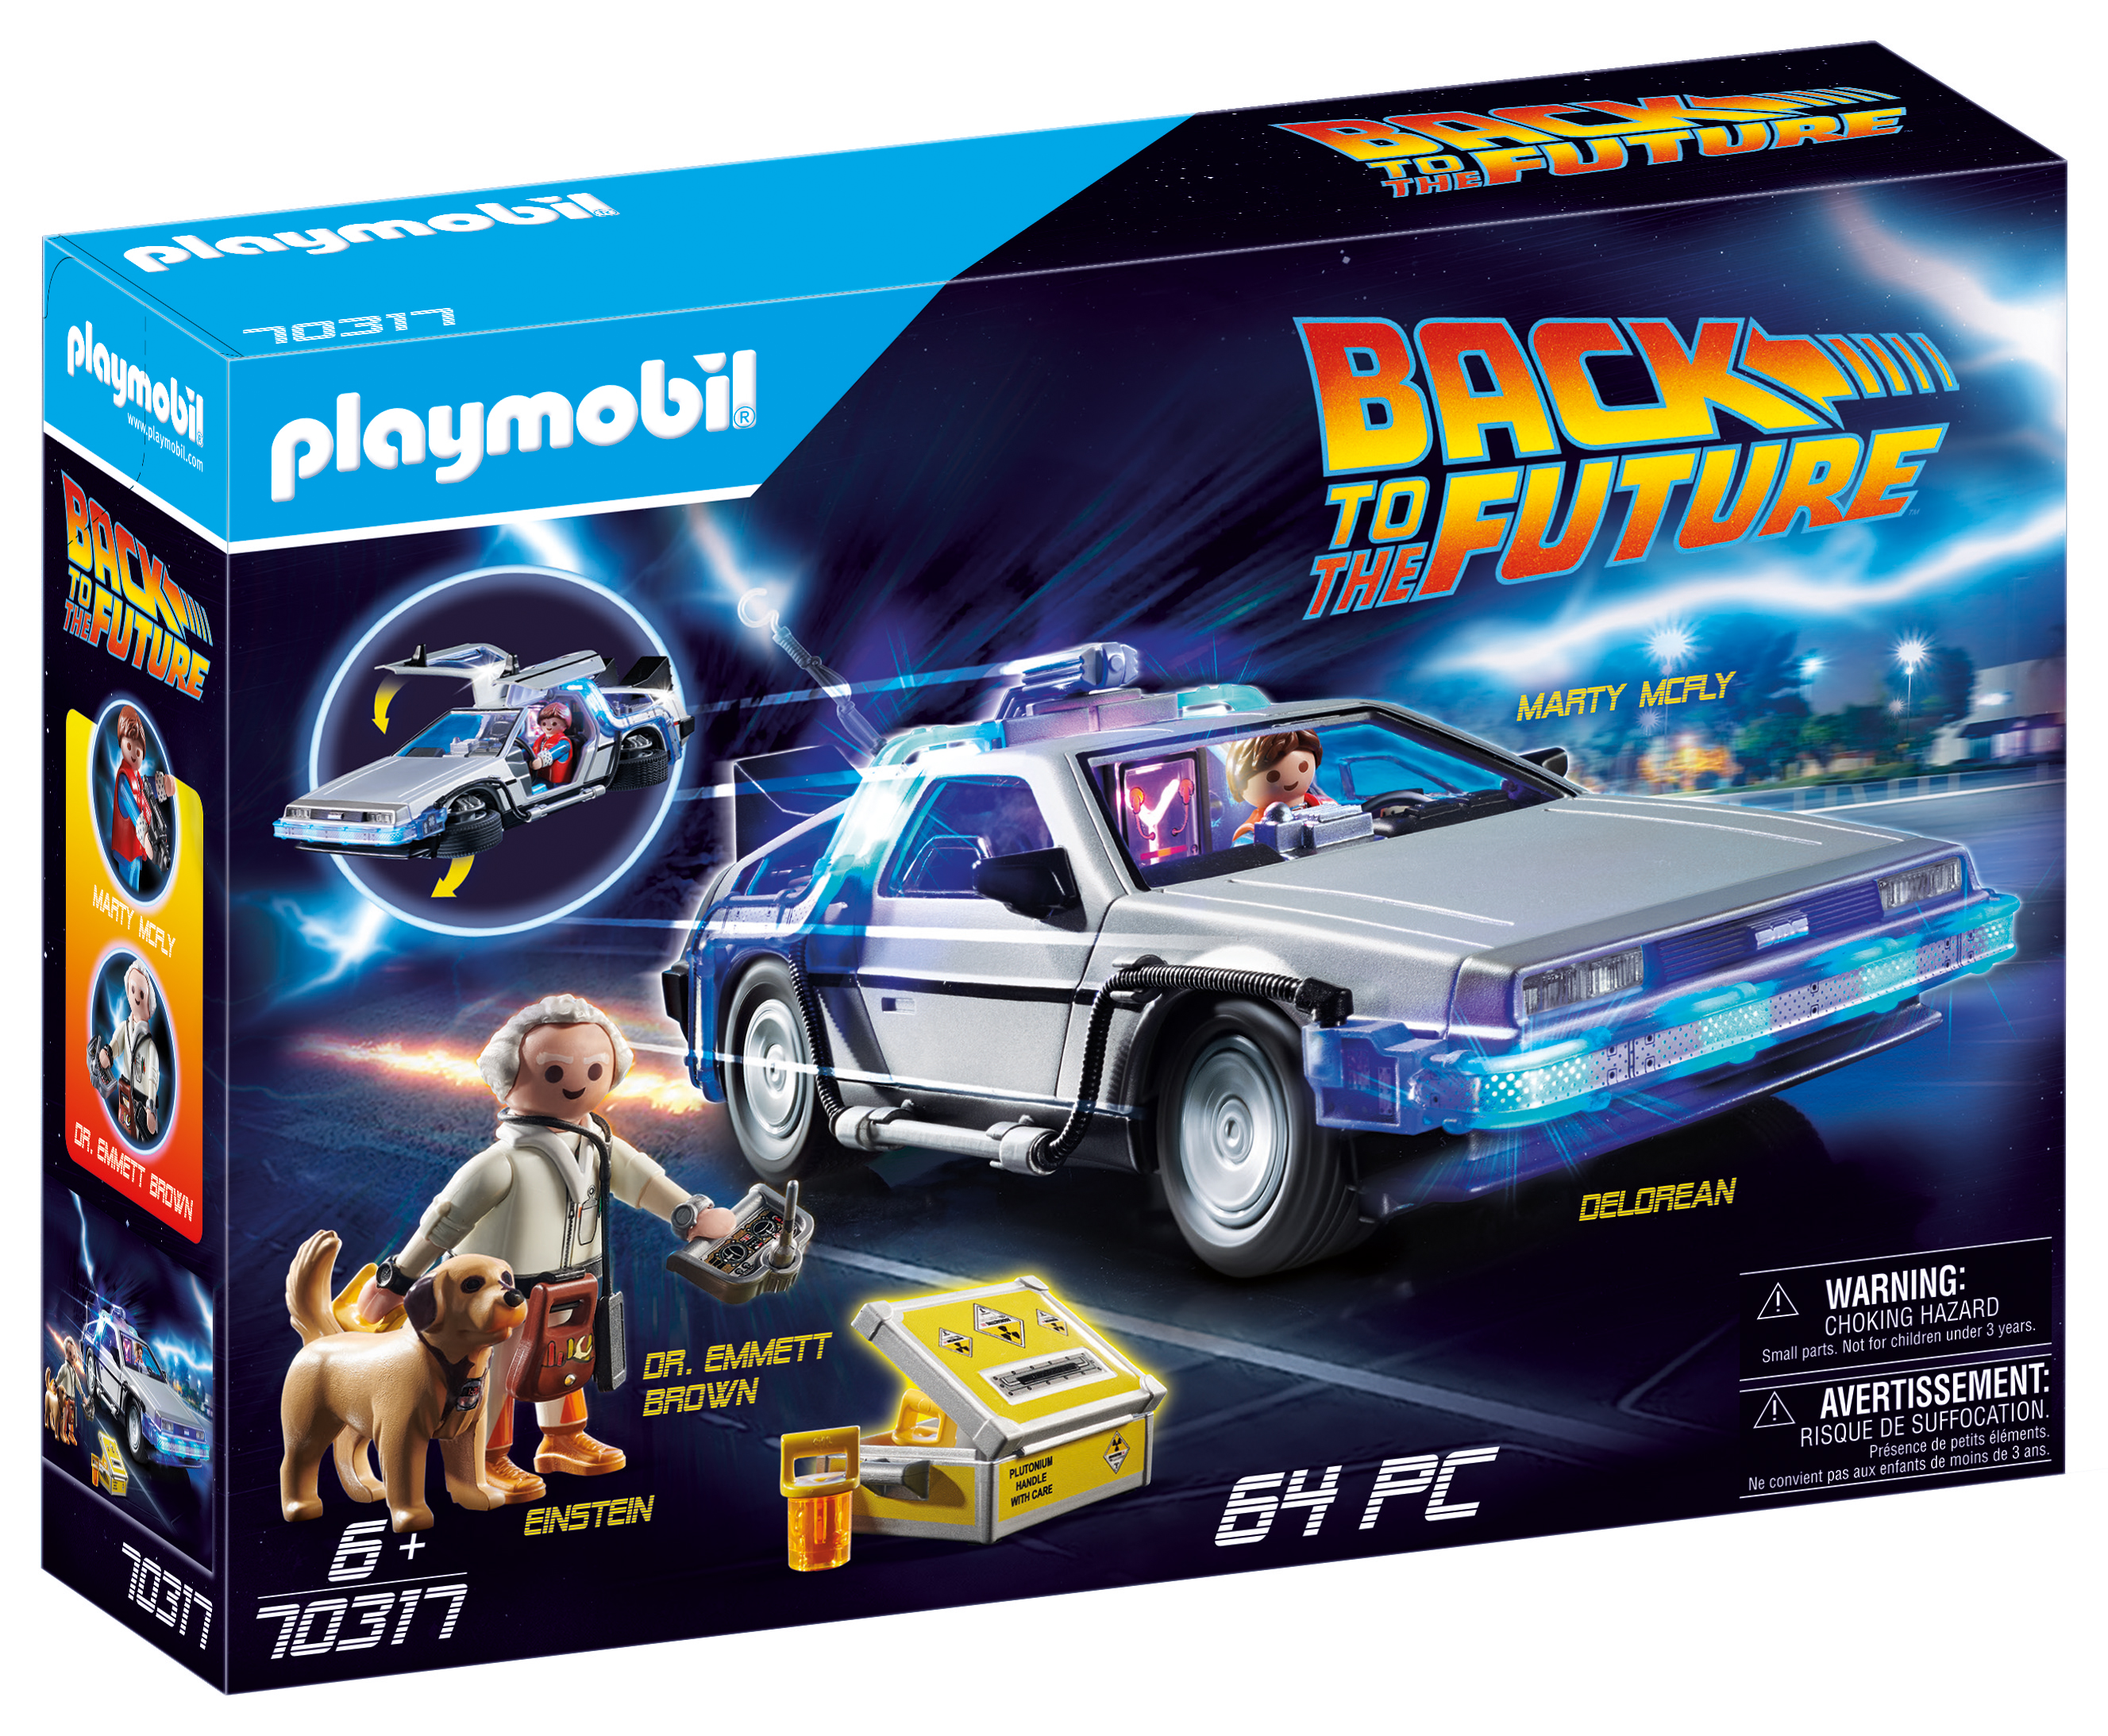 PLAYMOBIL Back to the Future DeLorean - image 1 of 8